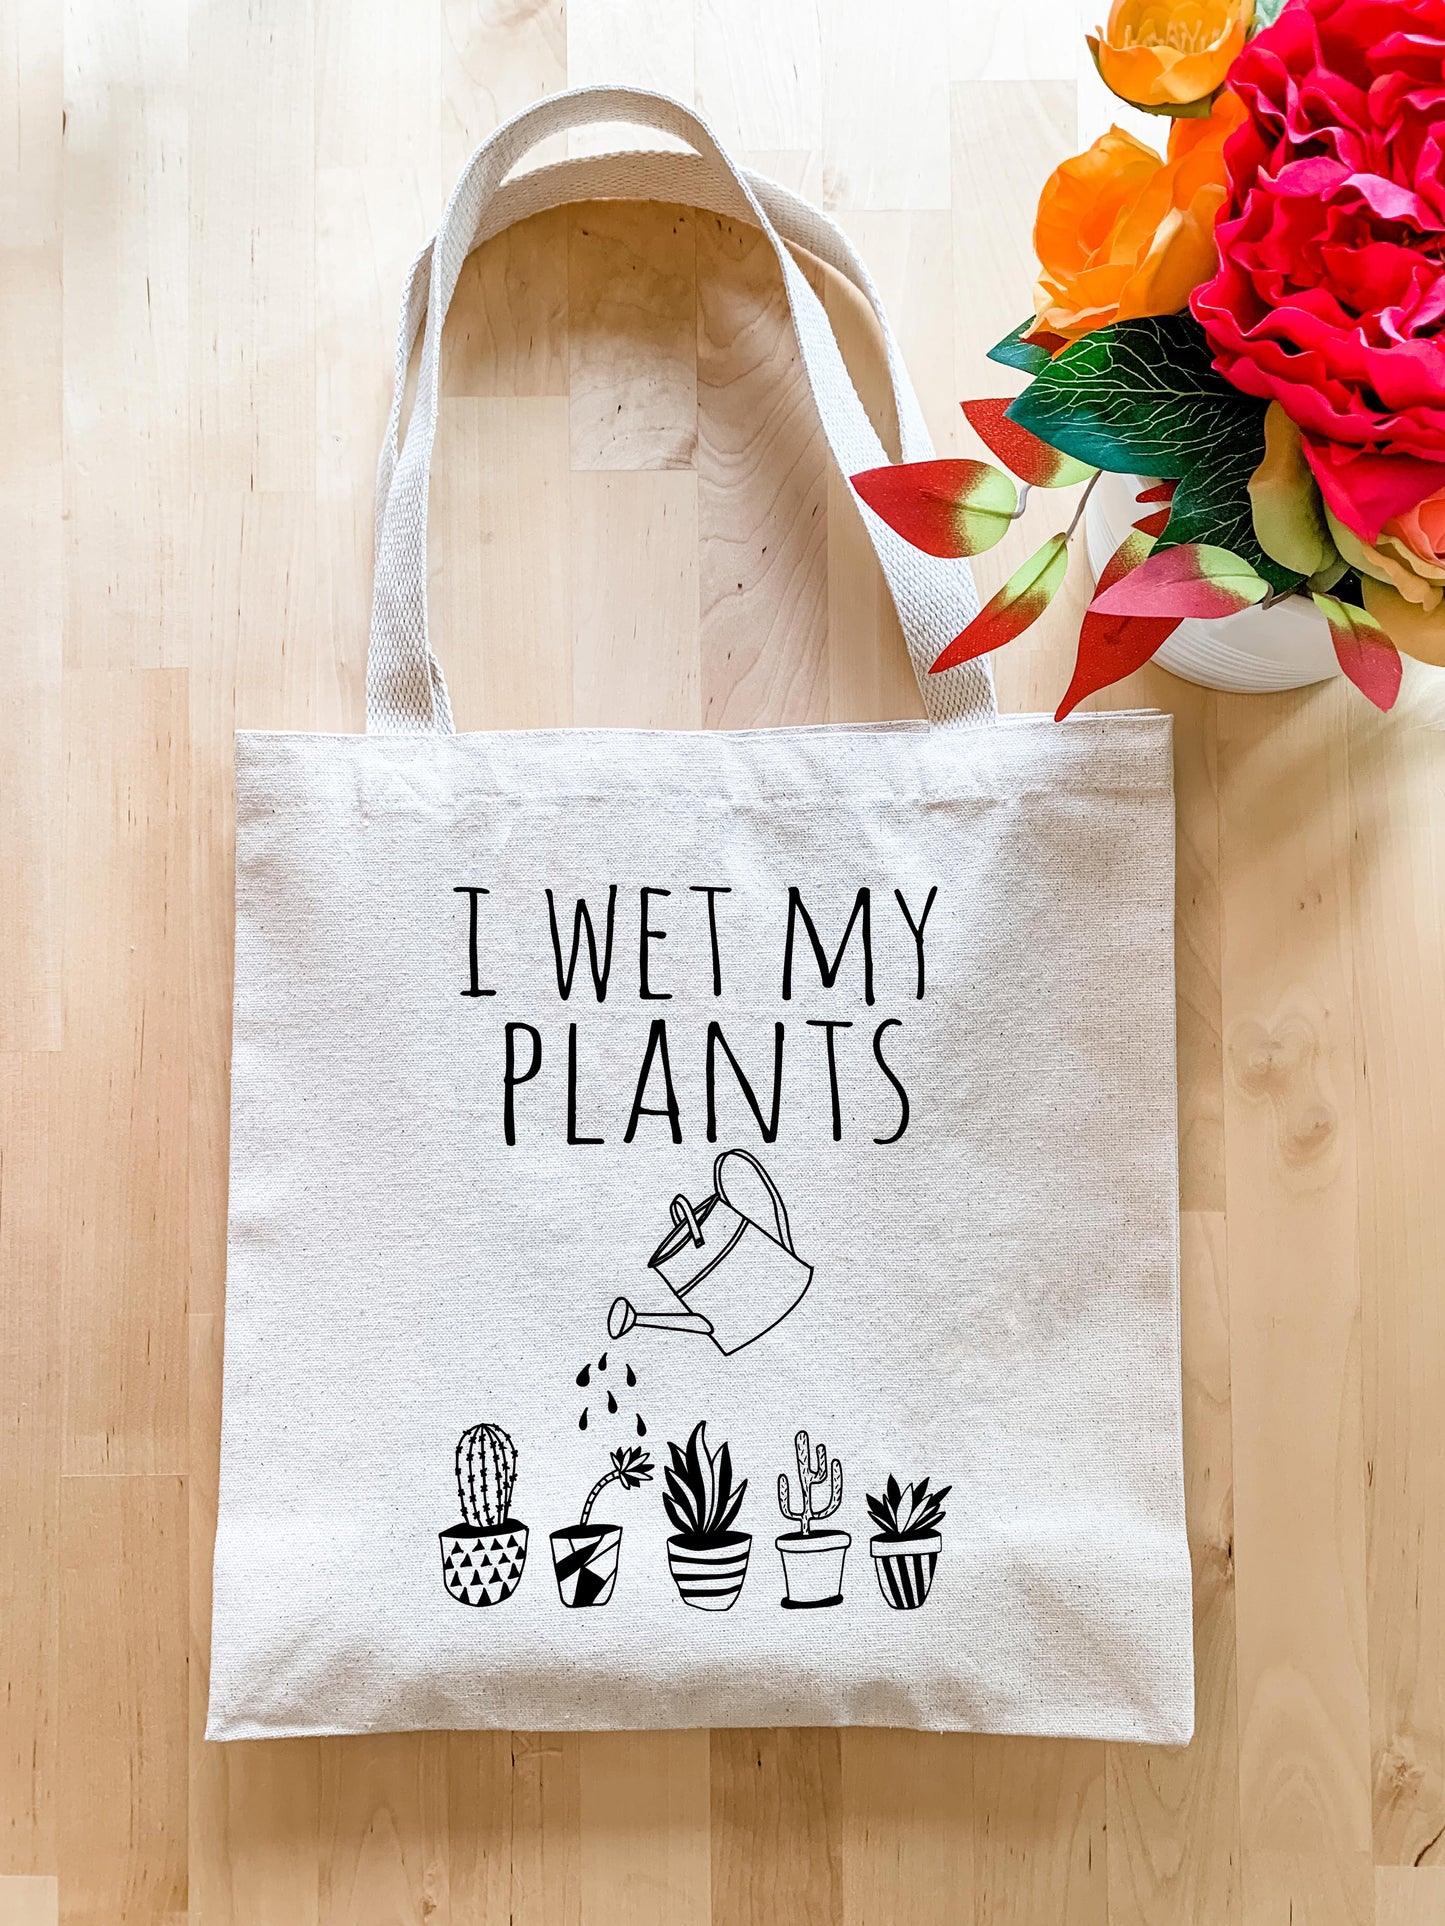 a tote bag that says i wet my plants